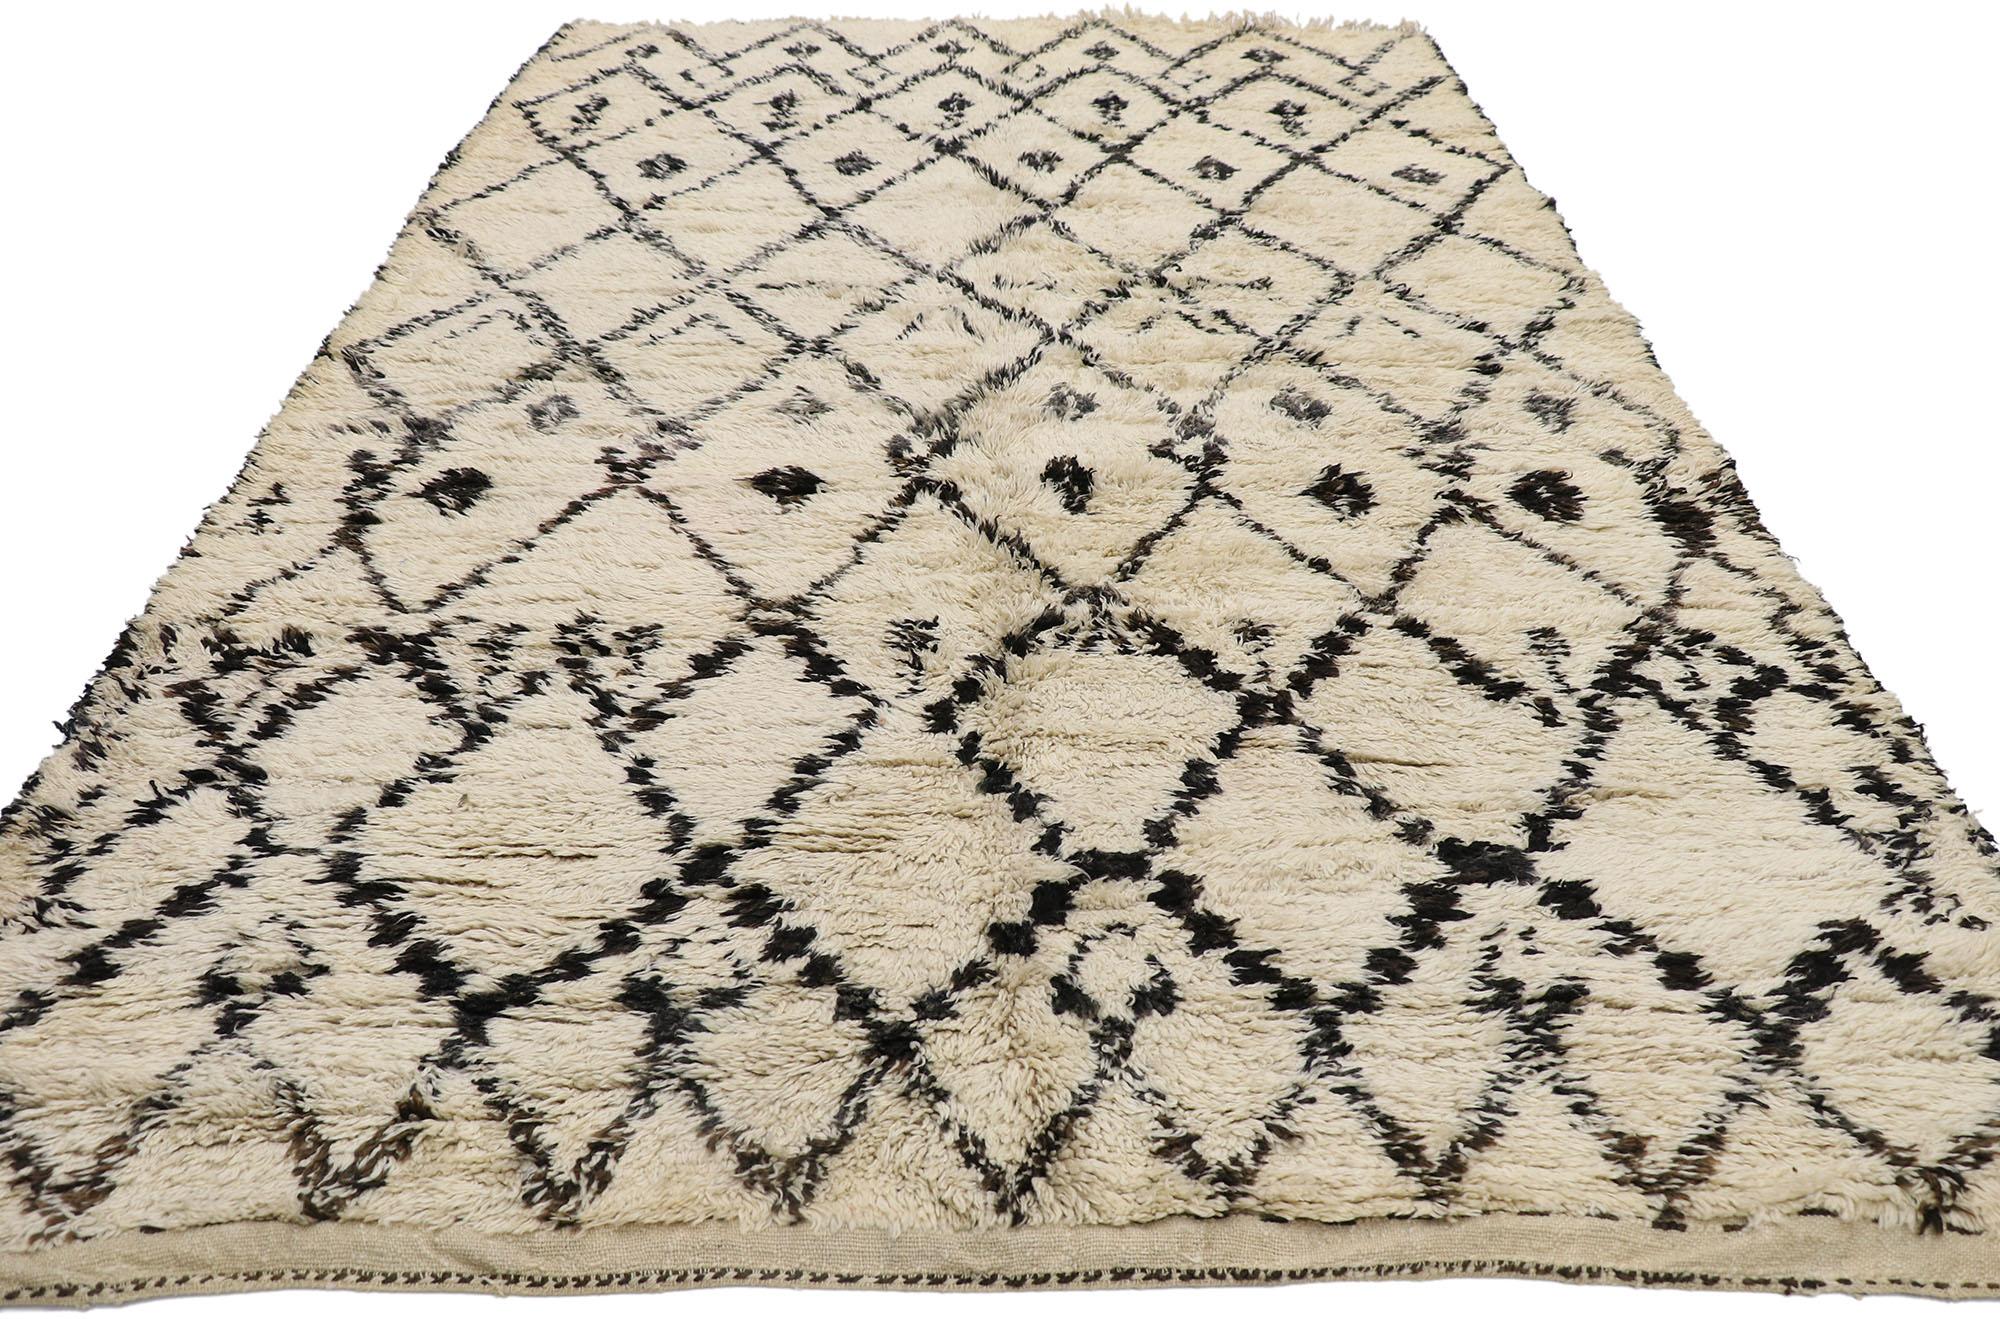 Hand-Knotted Vintage Berber Beni Ourain Moroccan Rug with Tribal Style